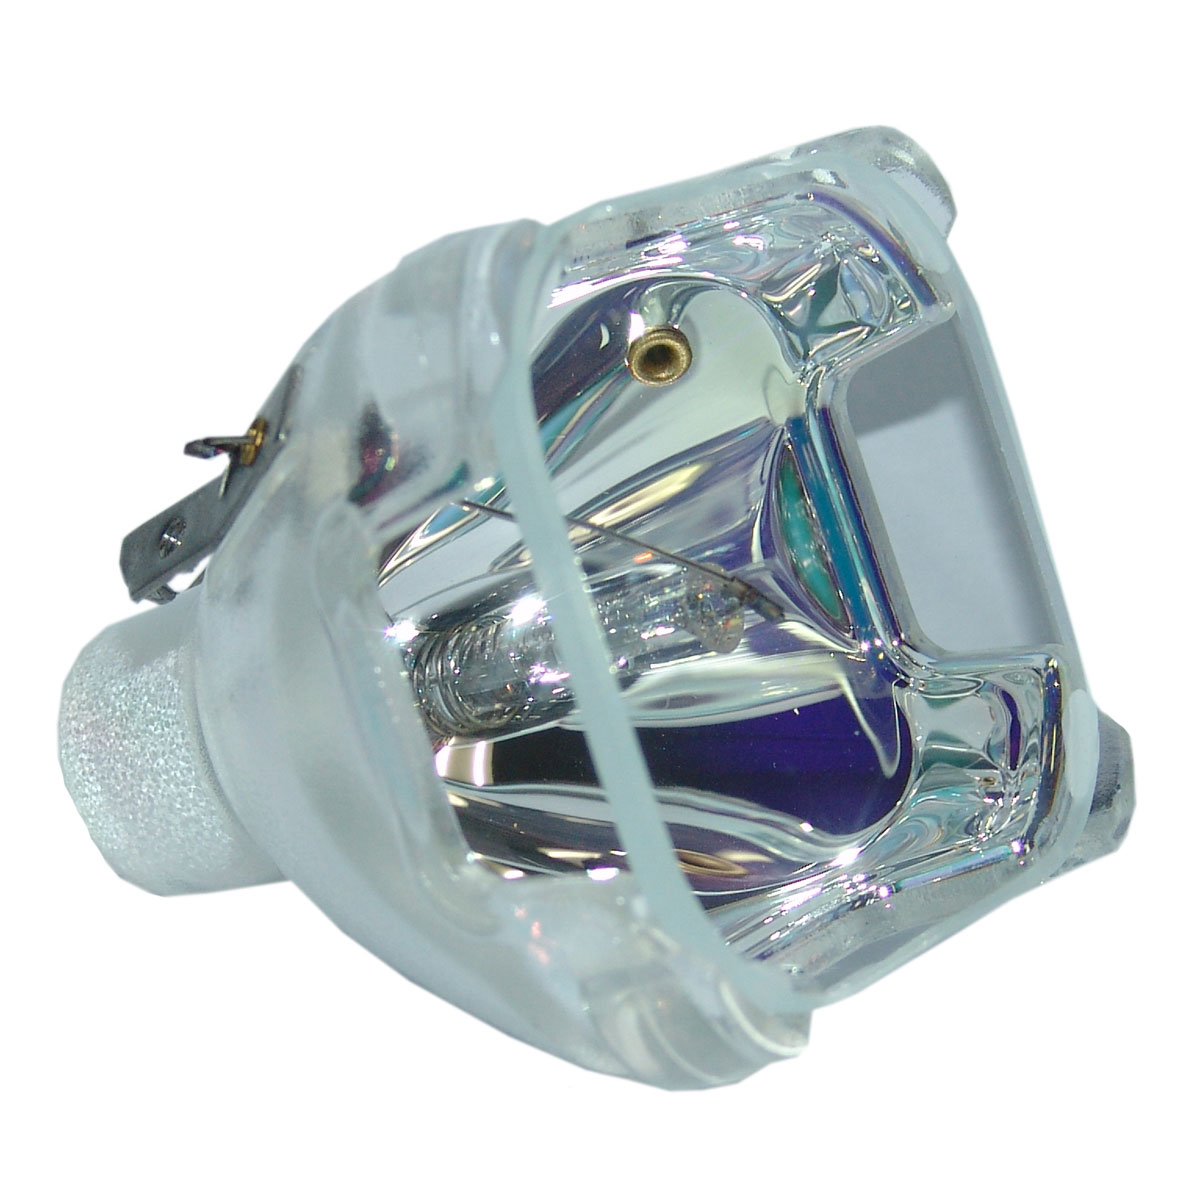 Lutema Economy Bulb for Eiki 610-300-7267 Projector (Lamp Only) - image 2 of 6